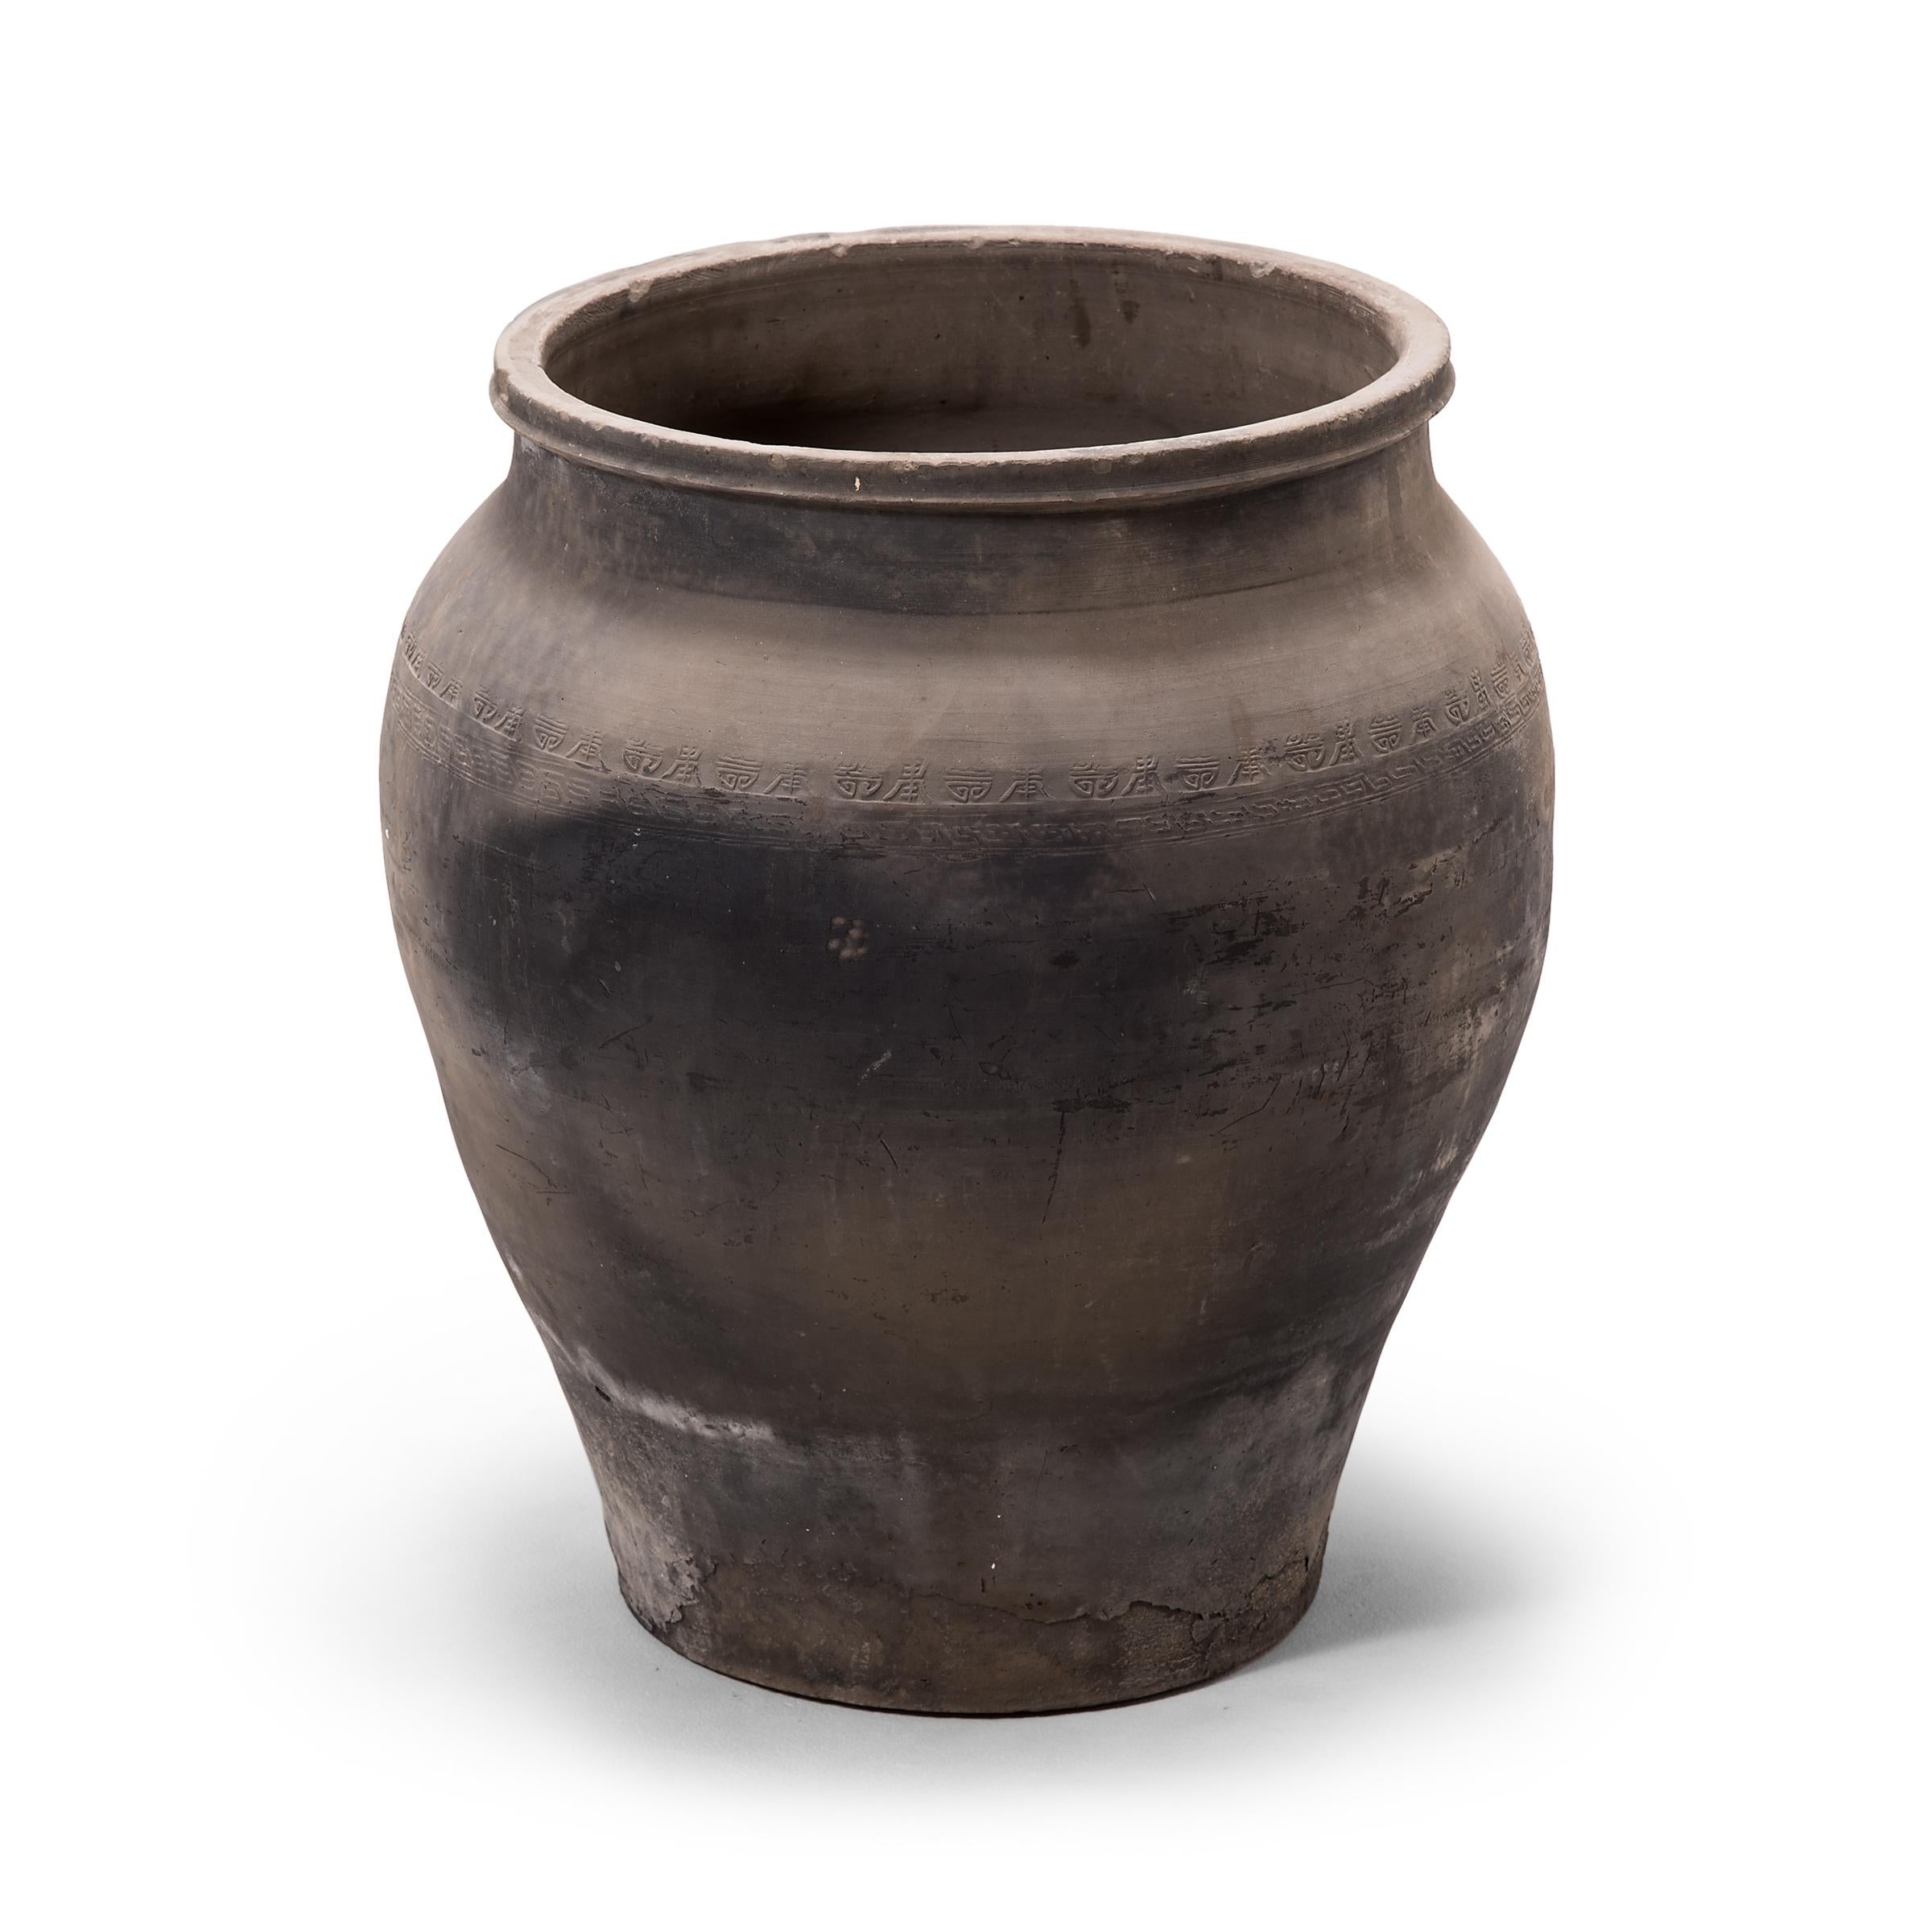 Charged with the humble task of storing dry goods, this capacious earthenware jar is distinguished by its tapered form and beautifully irregular unglazed surface. Smoke from the kiln gives the vessel its depth of color, transitioning gradually from